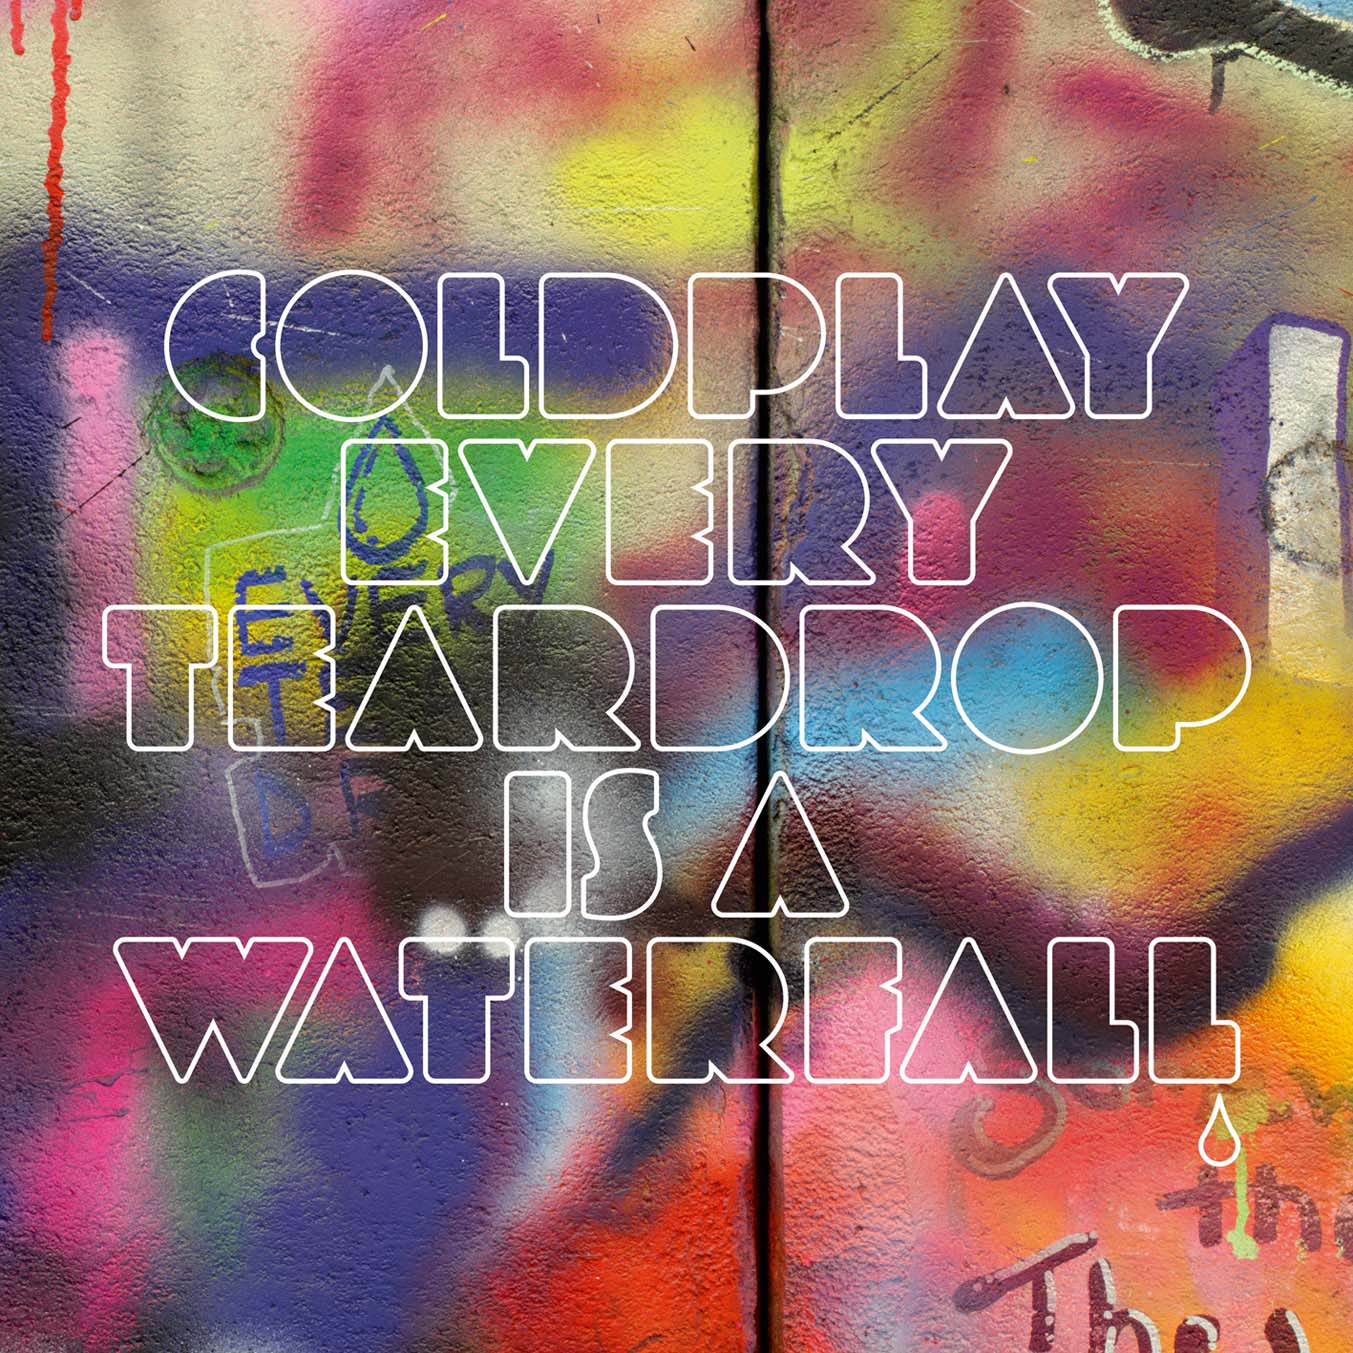 Coldplay Images Every Teardrop Is A Waterfall Cover - Every Teardrop Is A Waterfall Coldplay , HD Wallpaper & Backgrounds